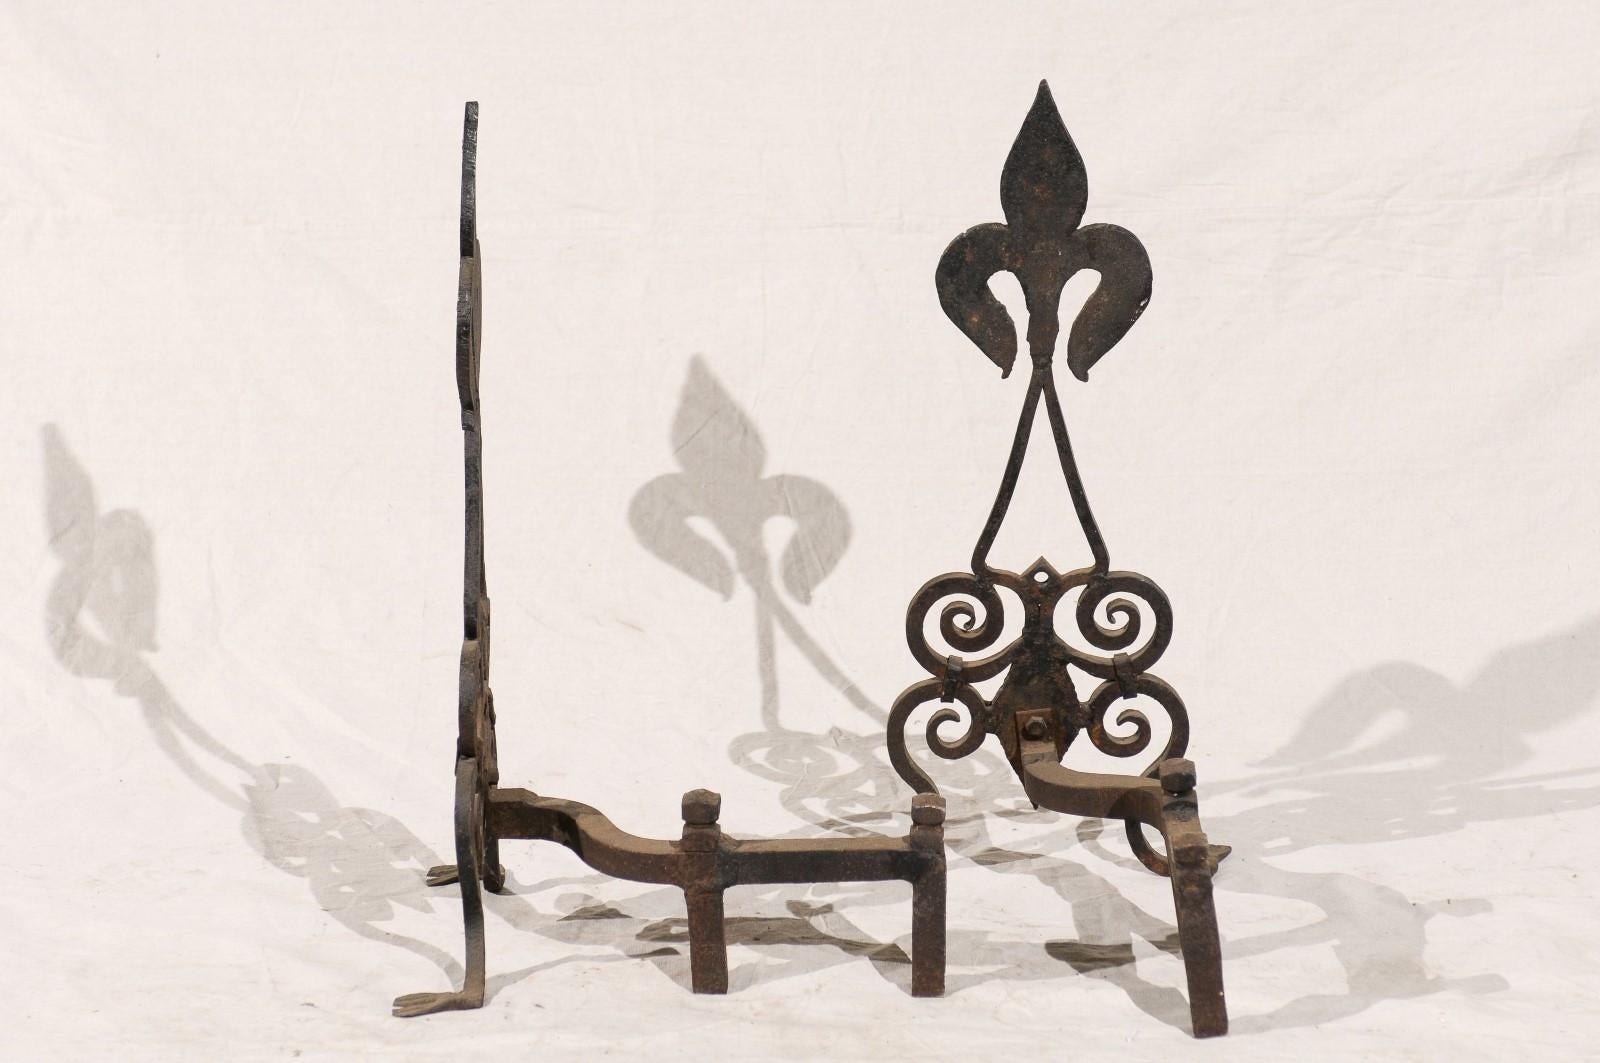 Pair of Late 19th-Early 20th Century American Black Fleur-de-Lis Andirons For Sale 2